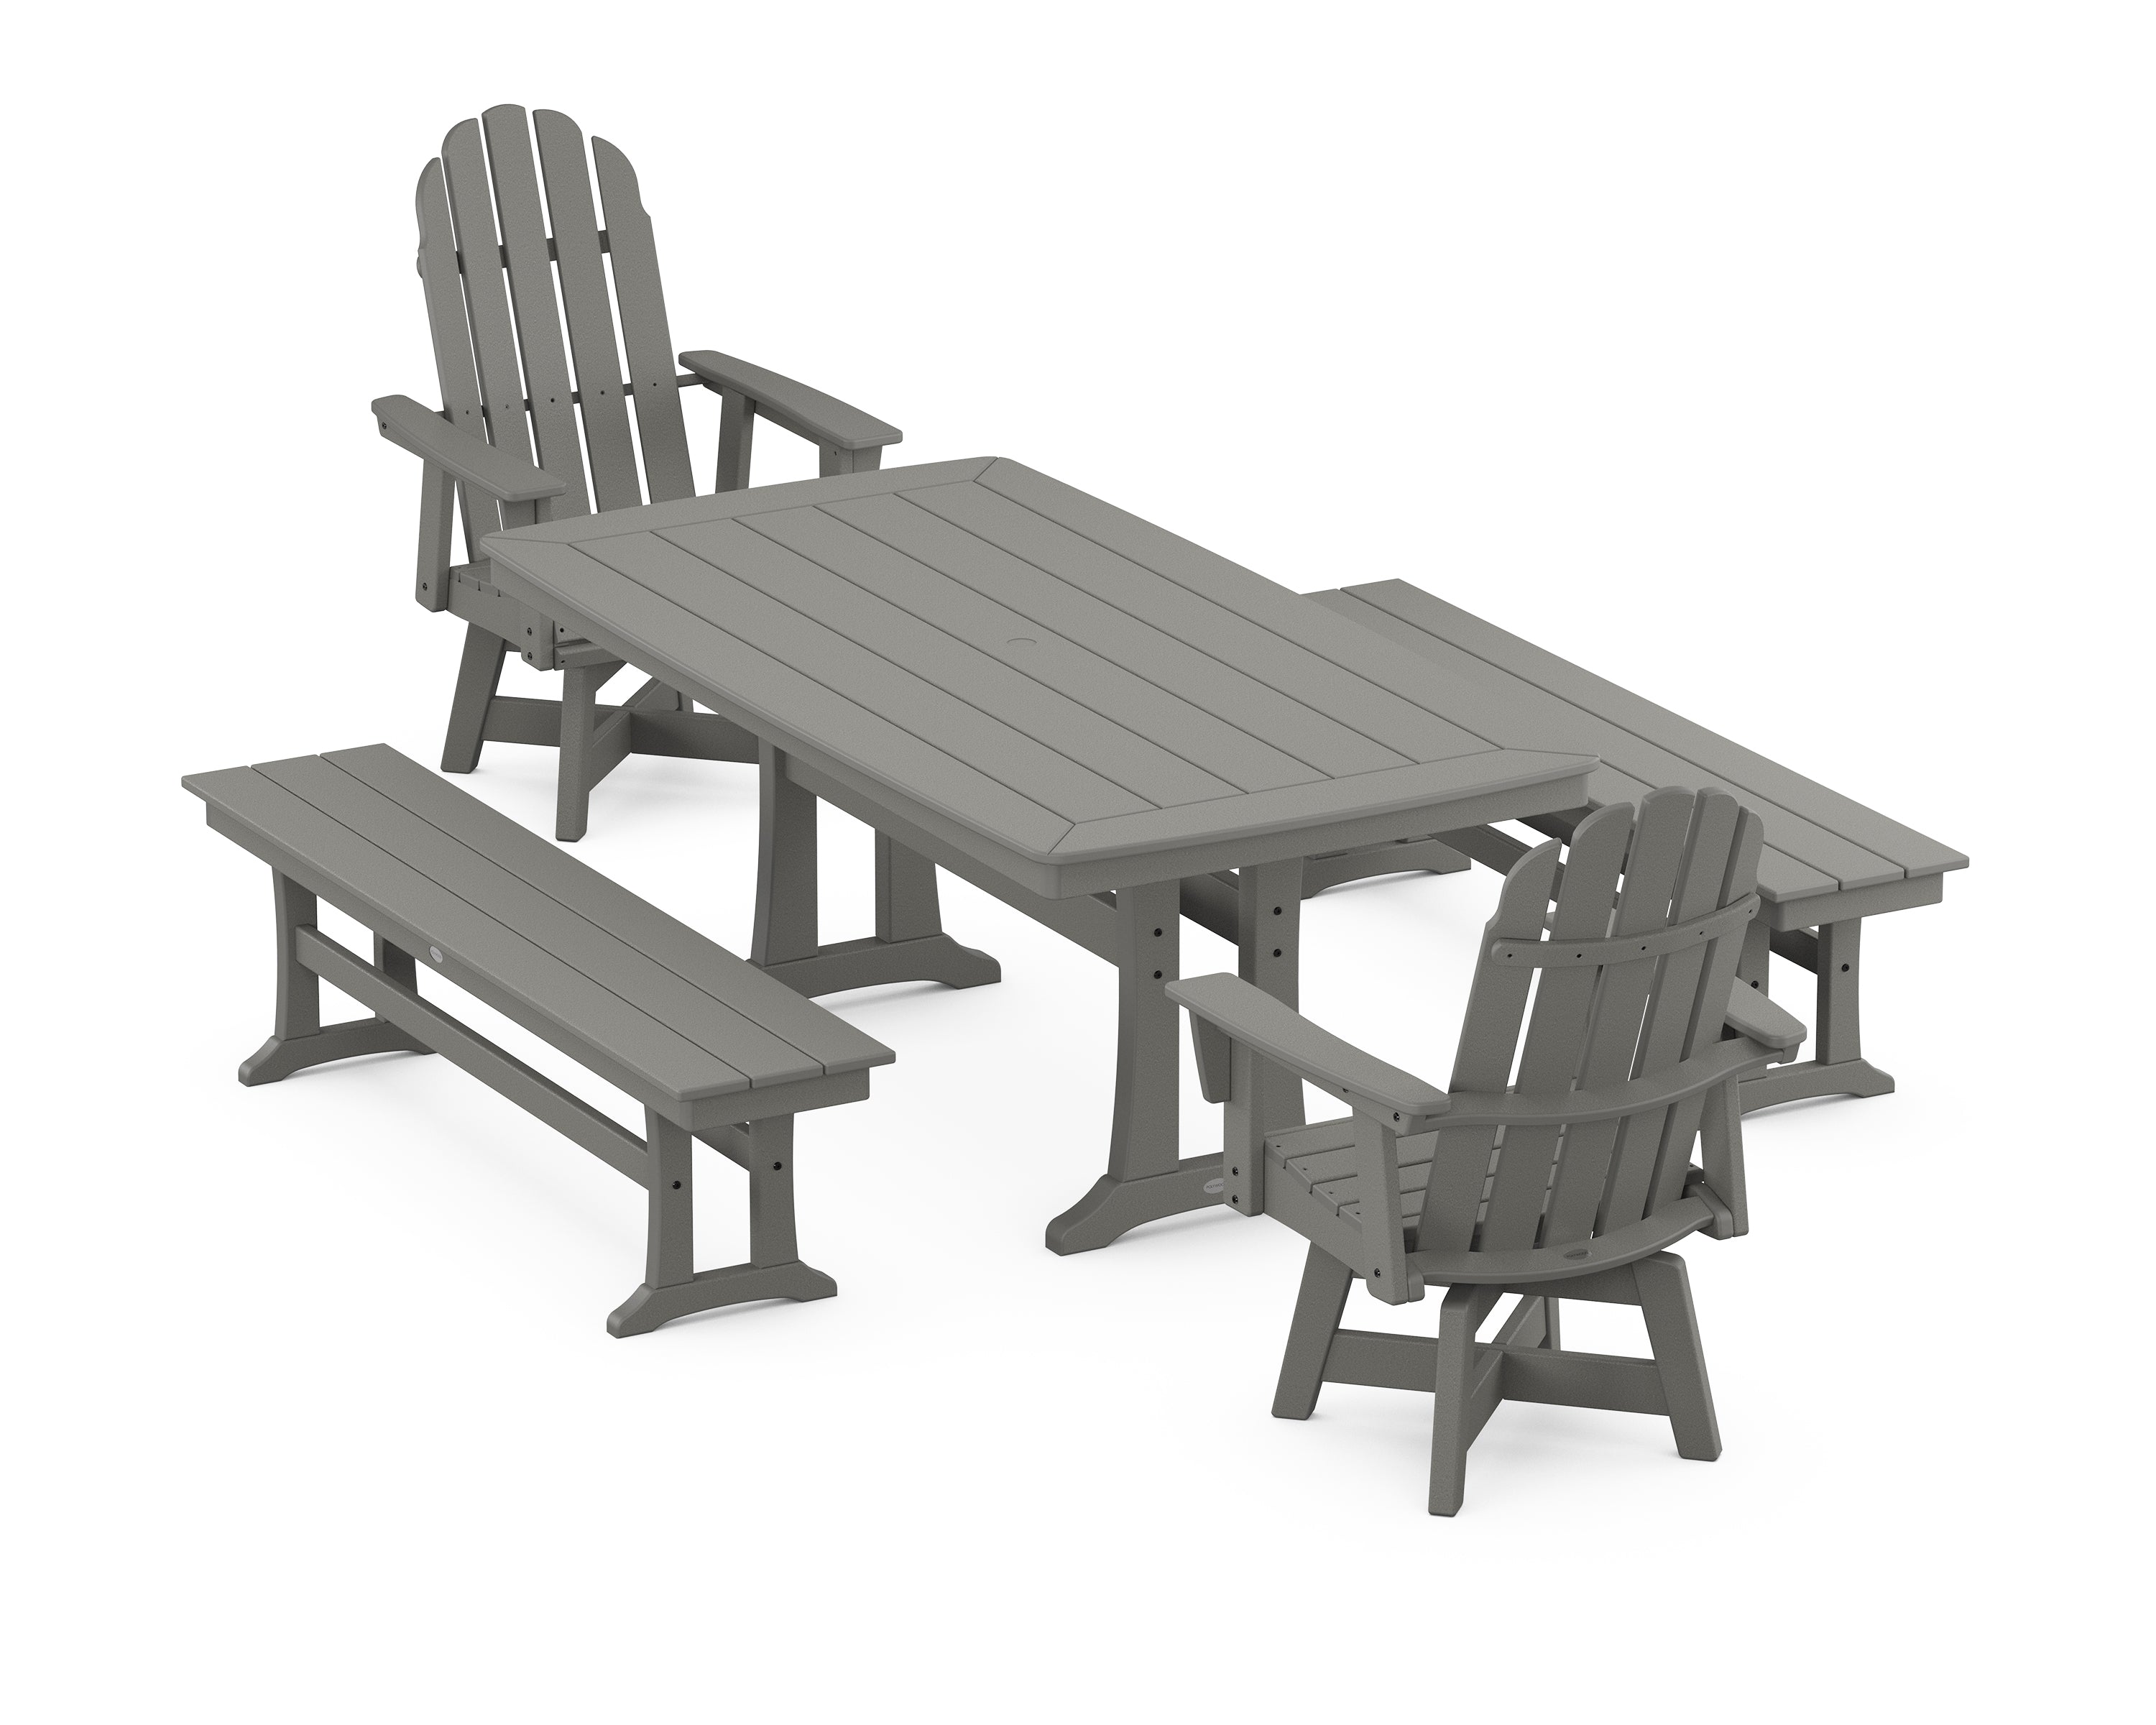 POLYWOOD® Vineyard Adirondack Swivel Chair 5-Piece Dining Set with Trestle Legs and Benches in Slate Grey